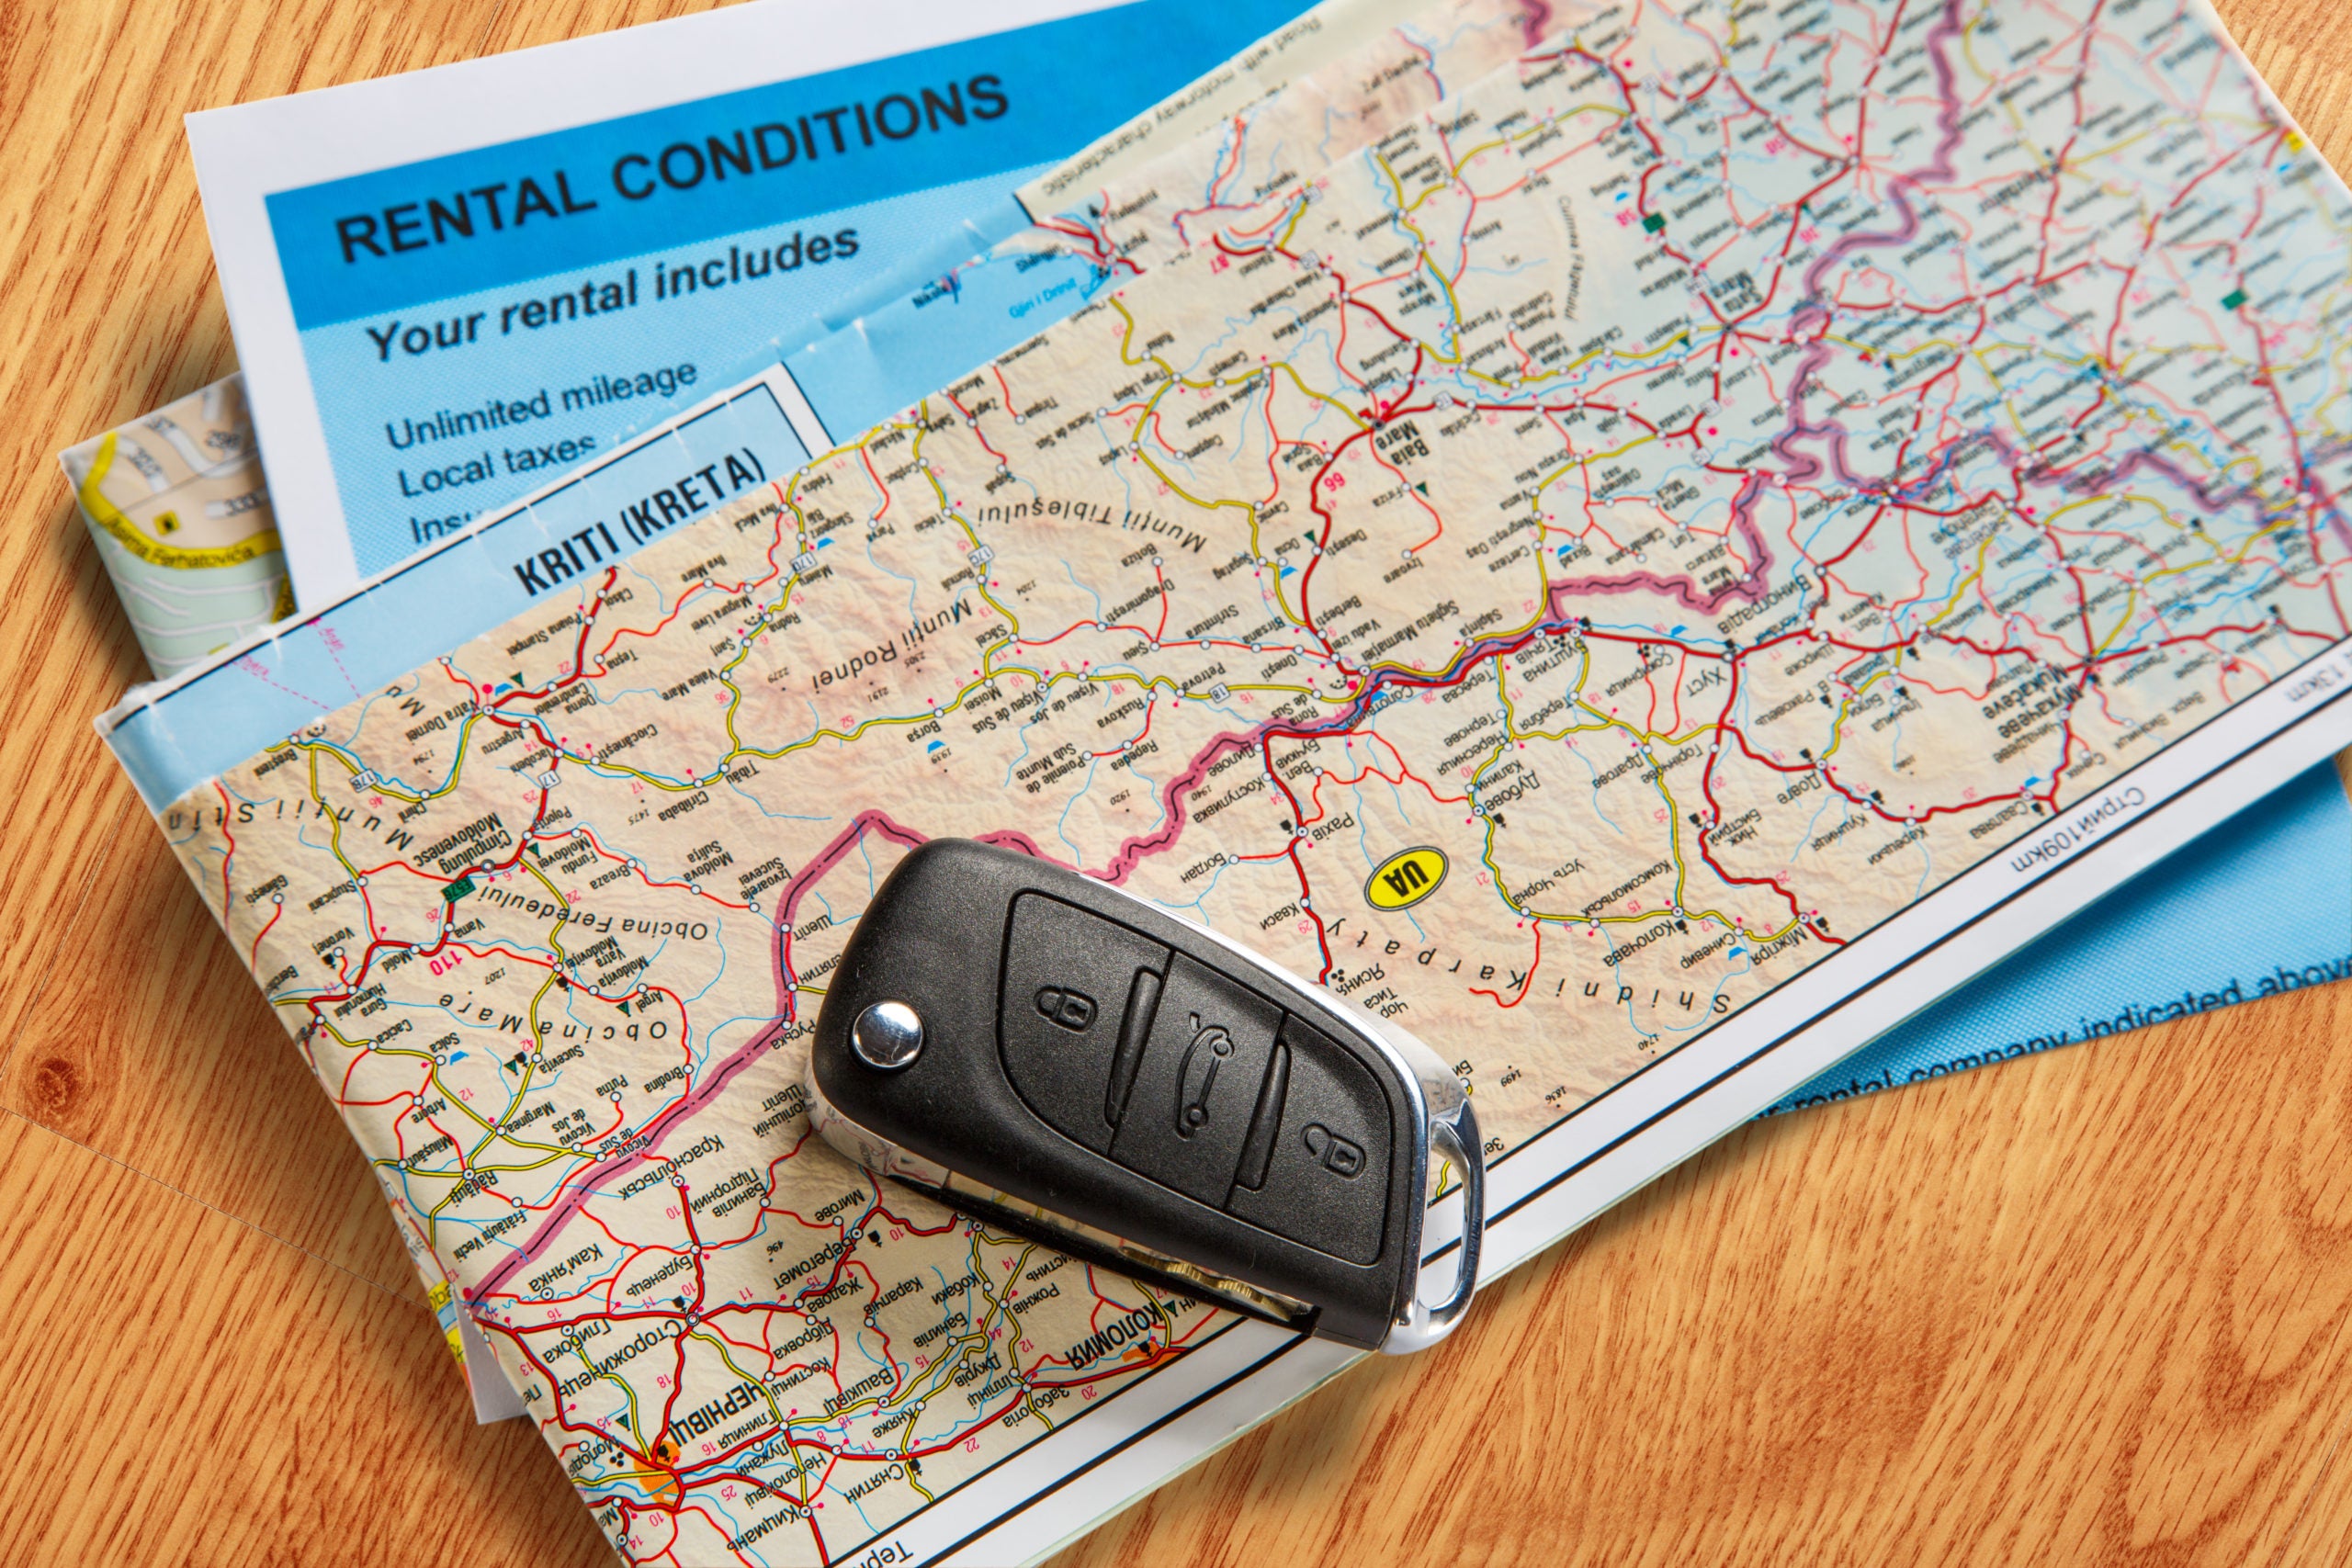 Car rental agreement and map